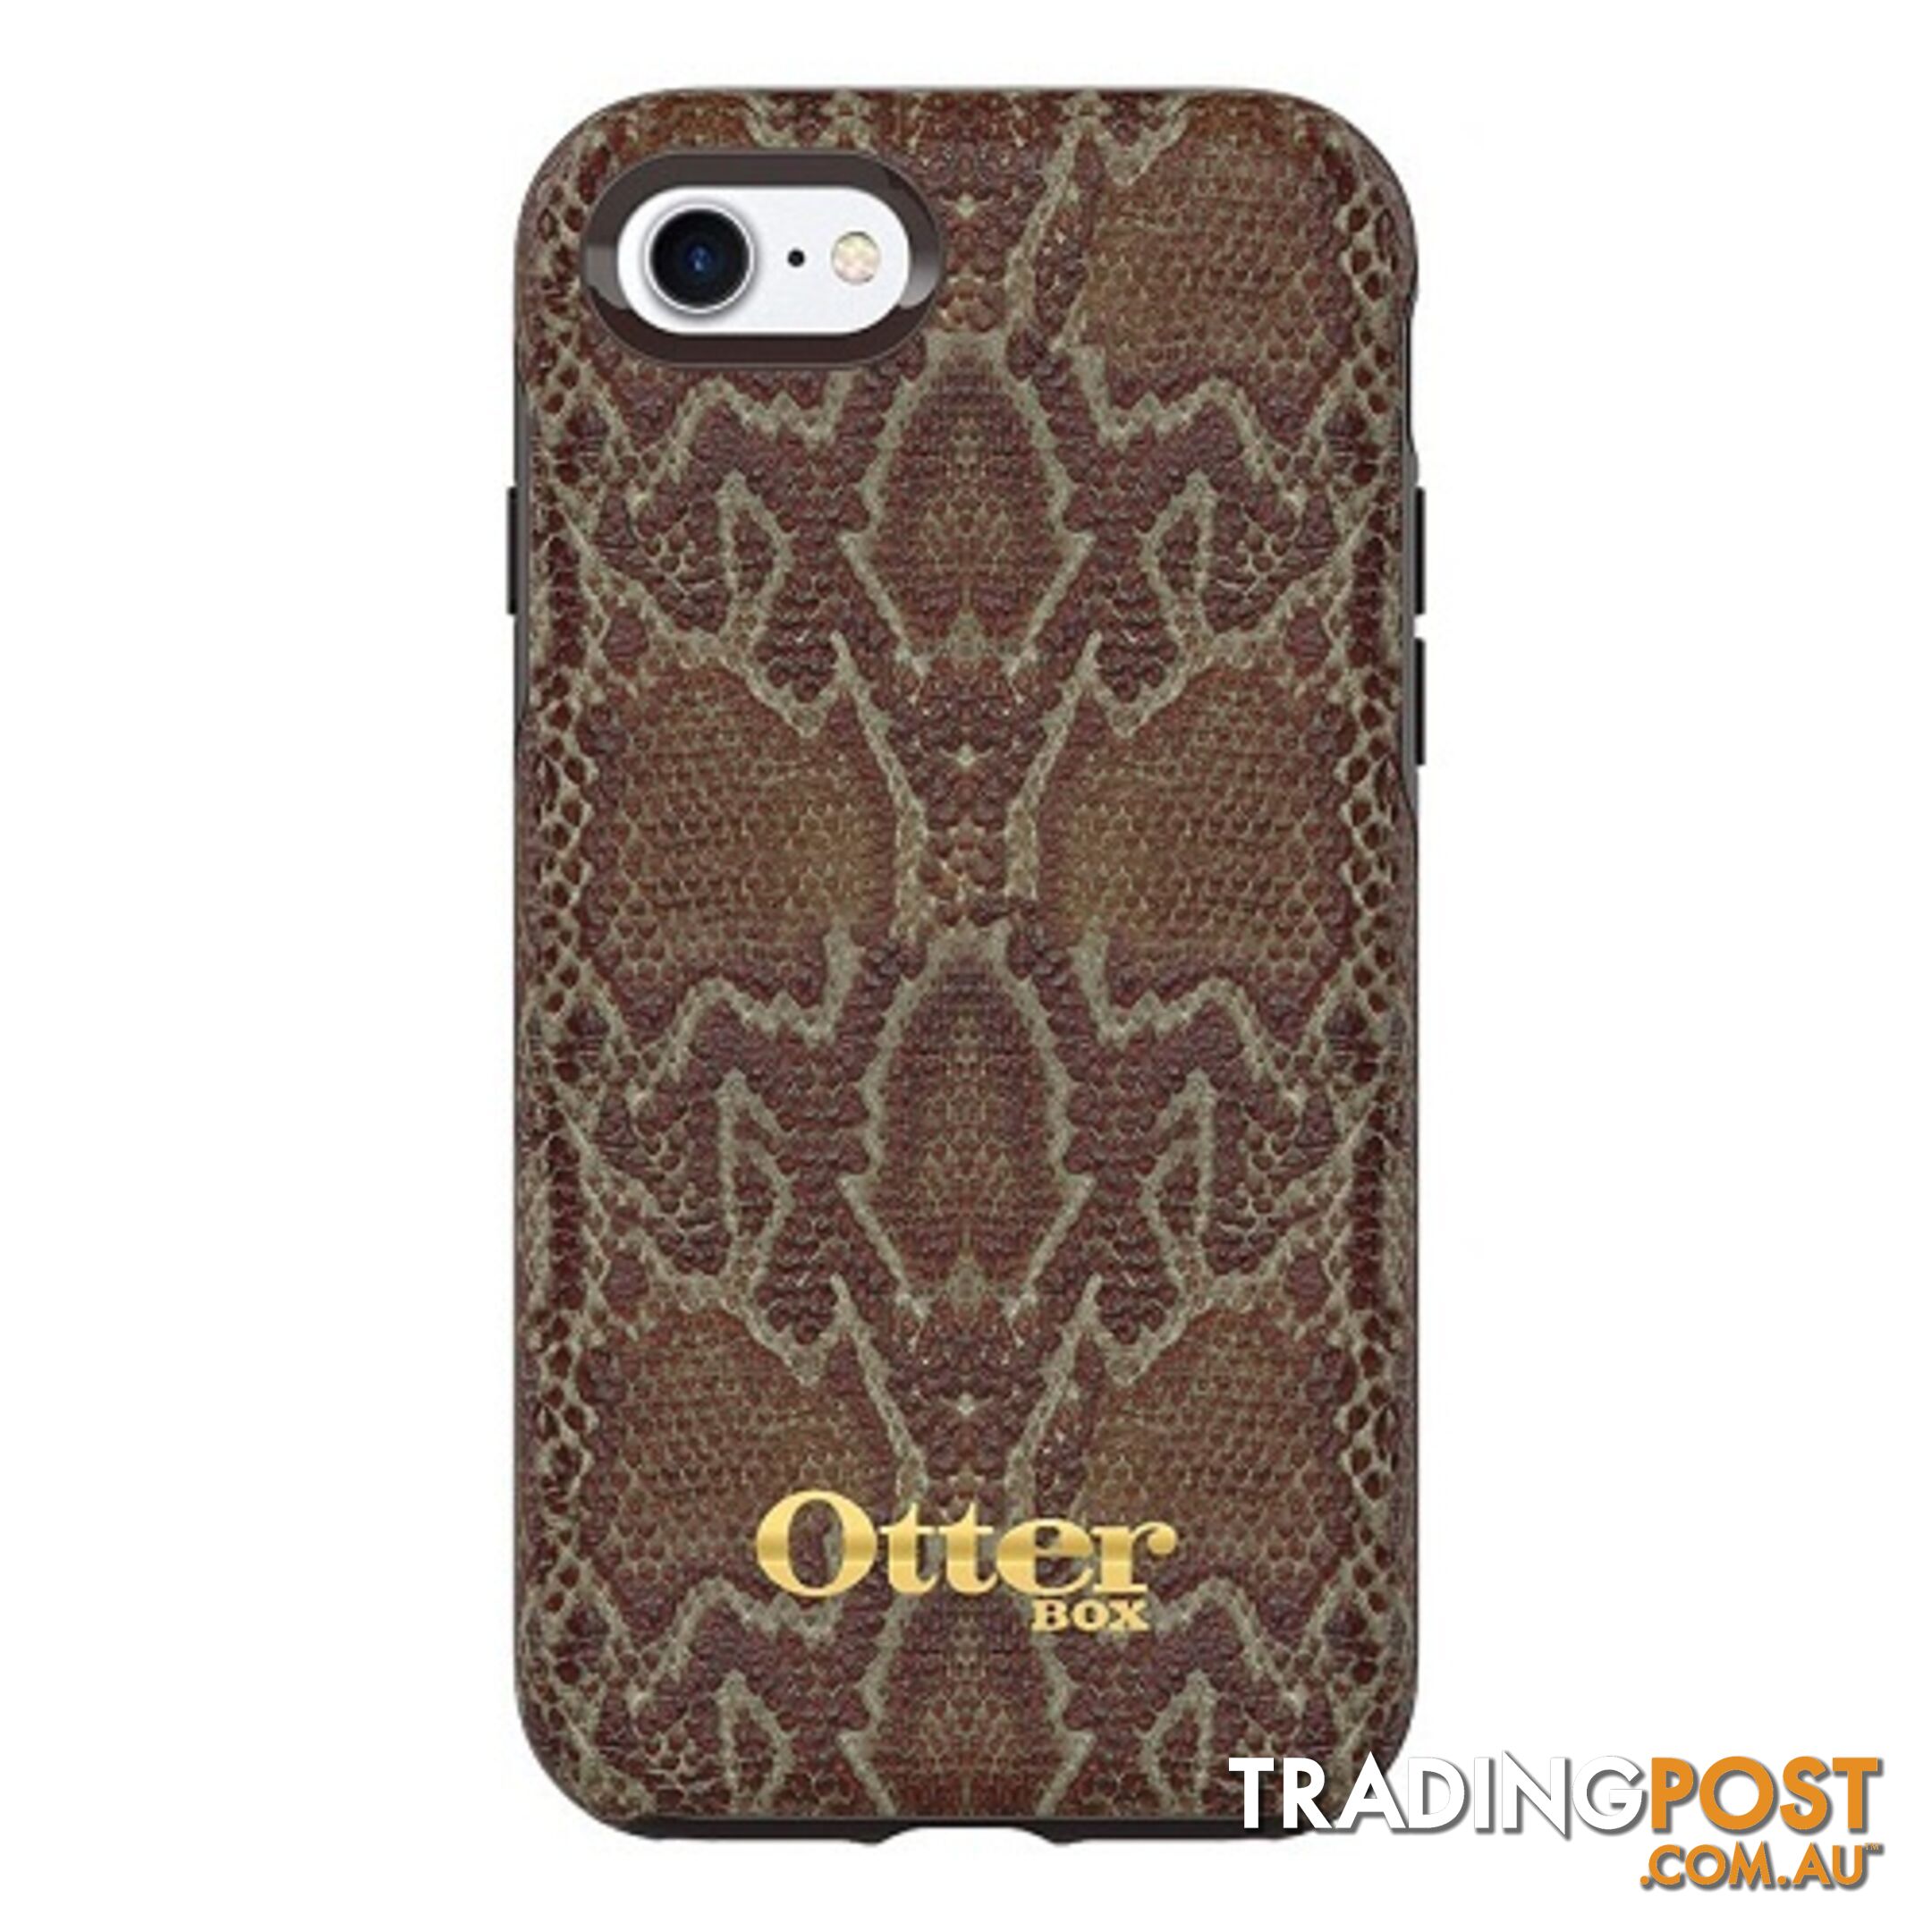 Otterbox Symmetry Leather Case iPhone 8/iPhone 7 Brown/Dark Snake Skin - 660543405221/78-51133 - OtterBox